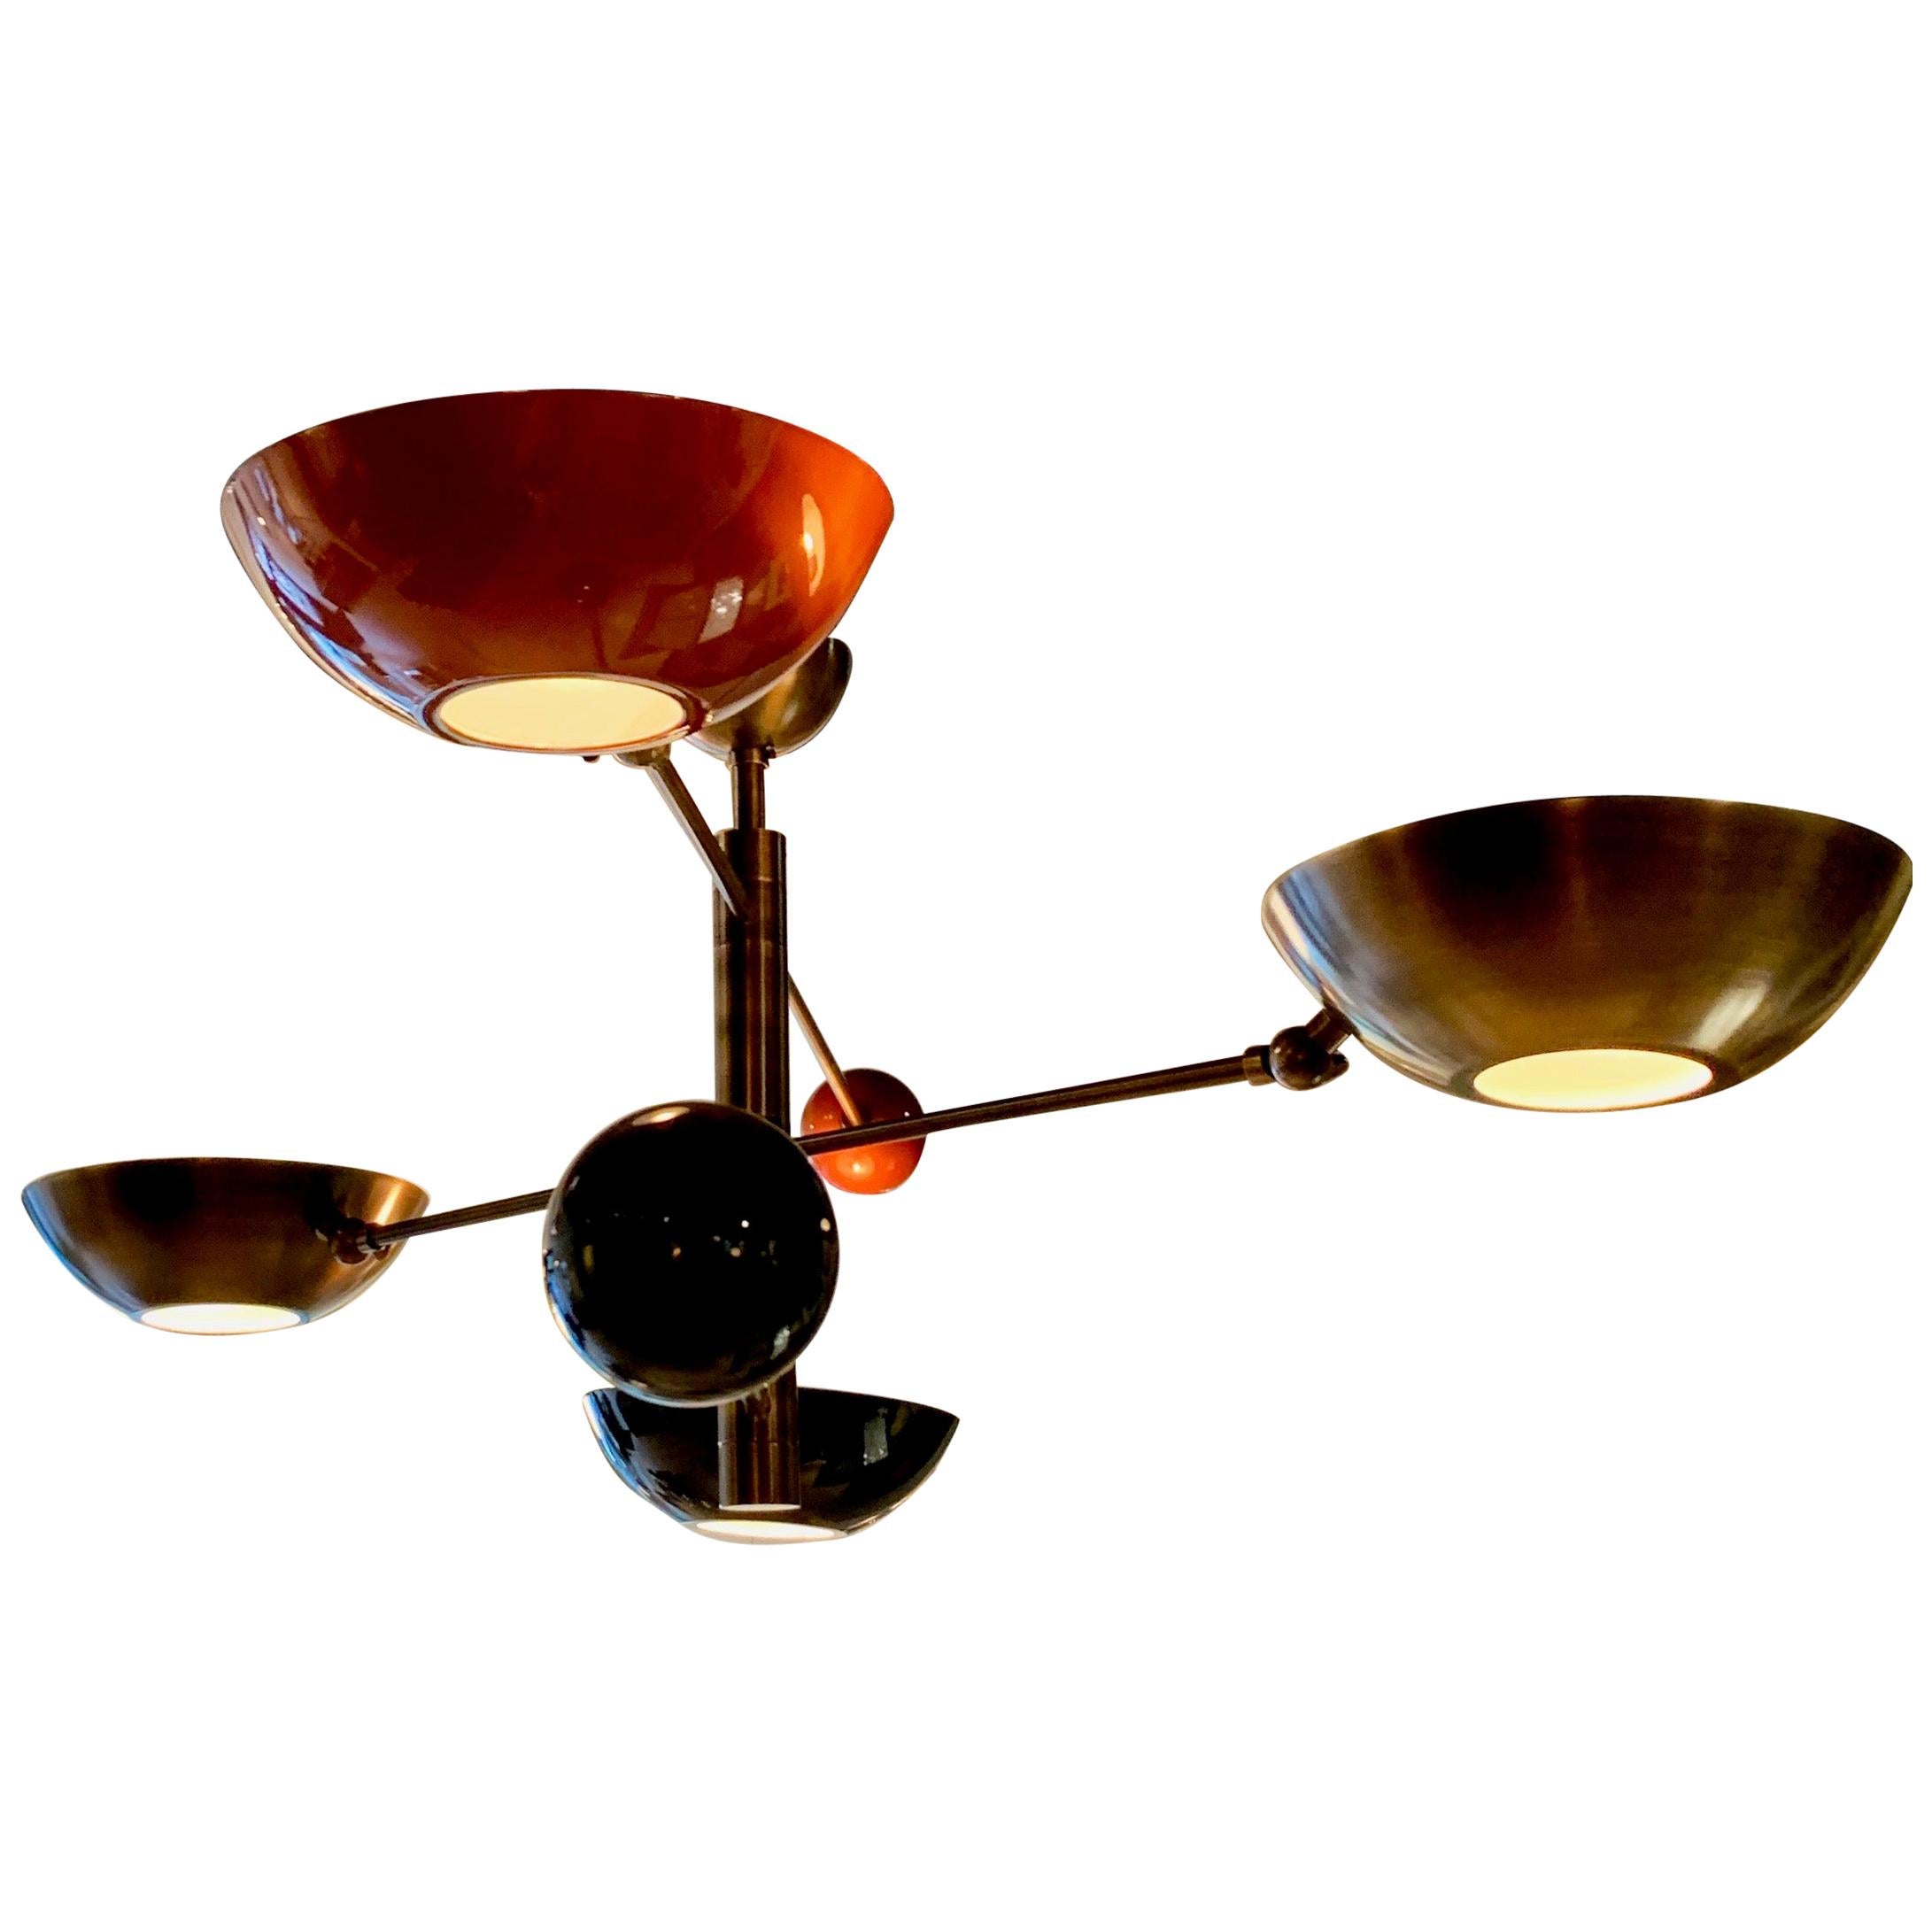 Contrapesi Cup Pendant, Bronze Patinated Brass with Grey and Orange Cups